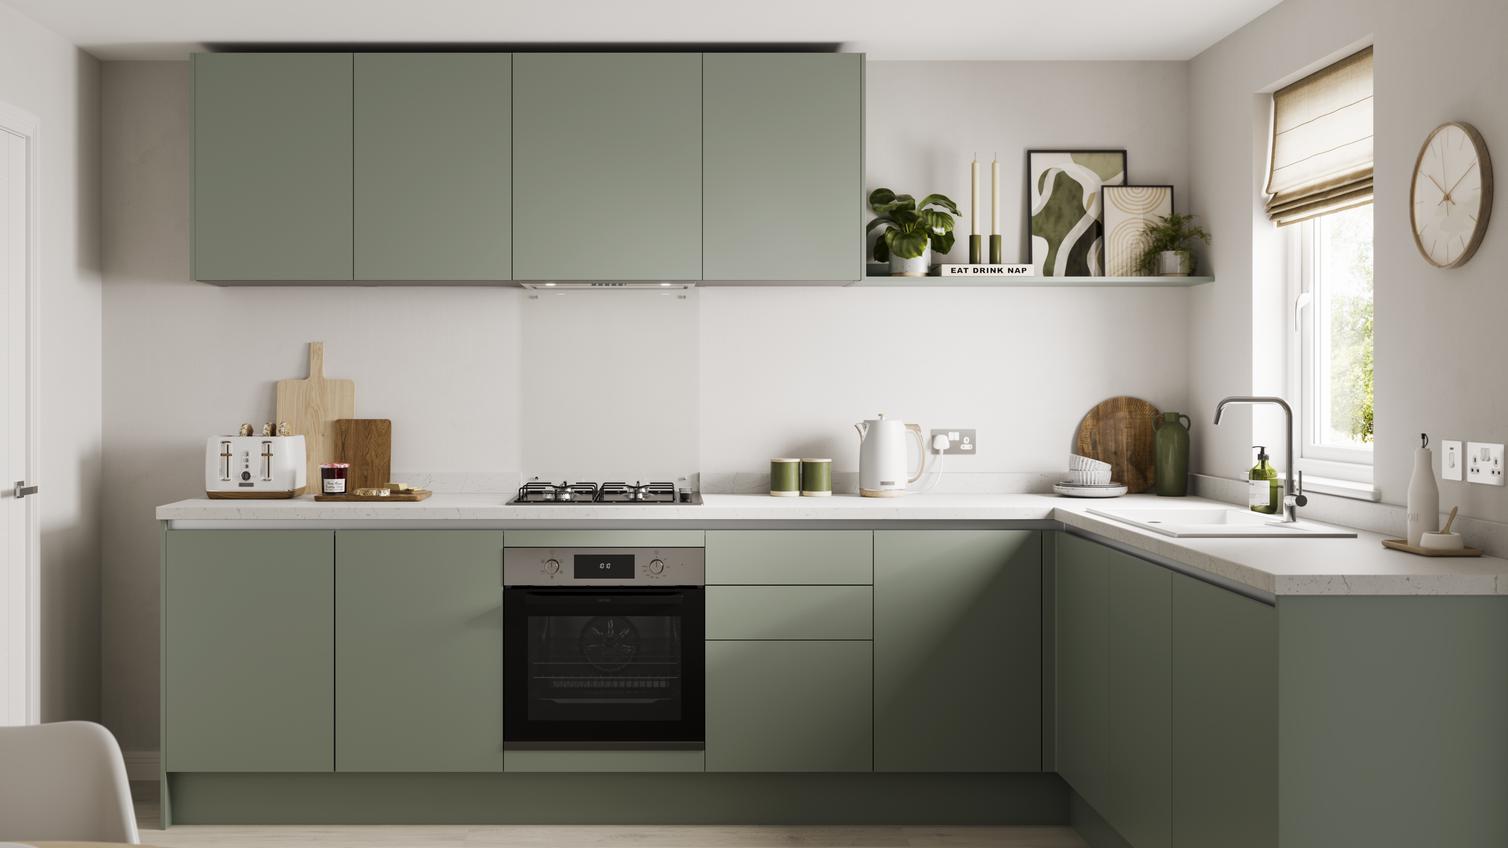 An l-shaped kitchen layout with green cabinets white marble-effect worktop, and pale wood flooring.